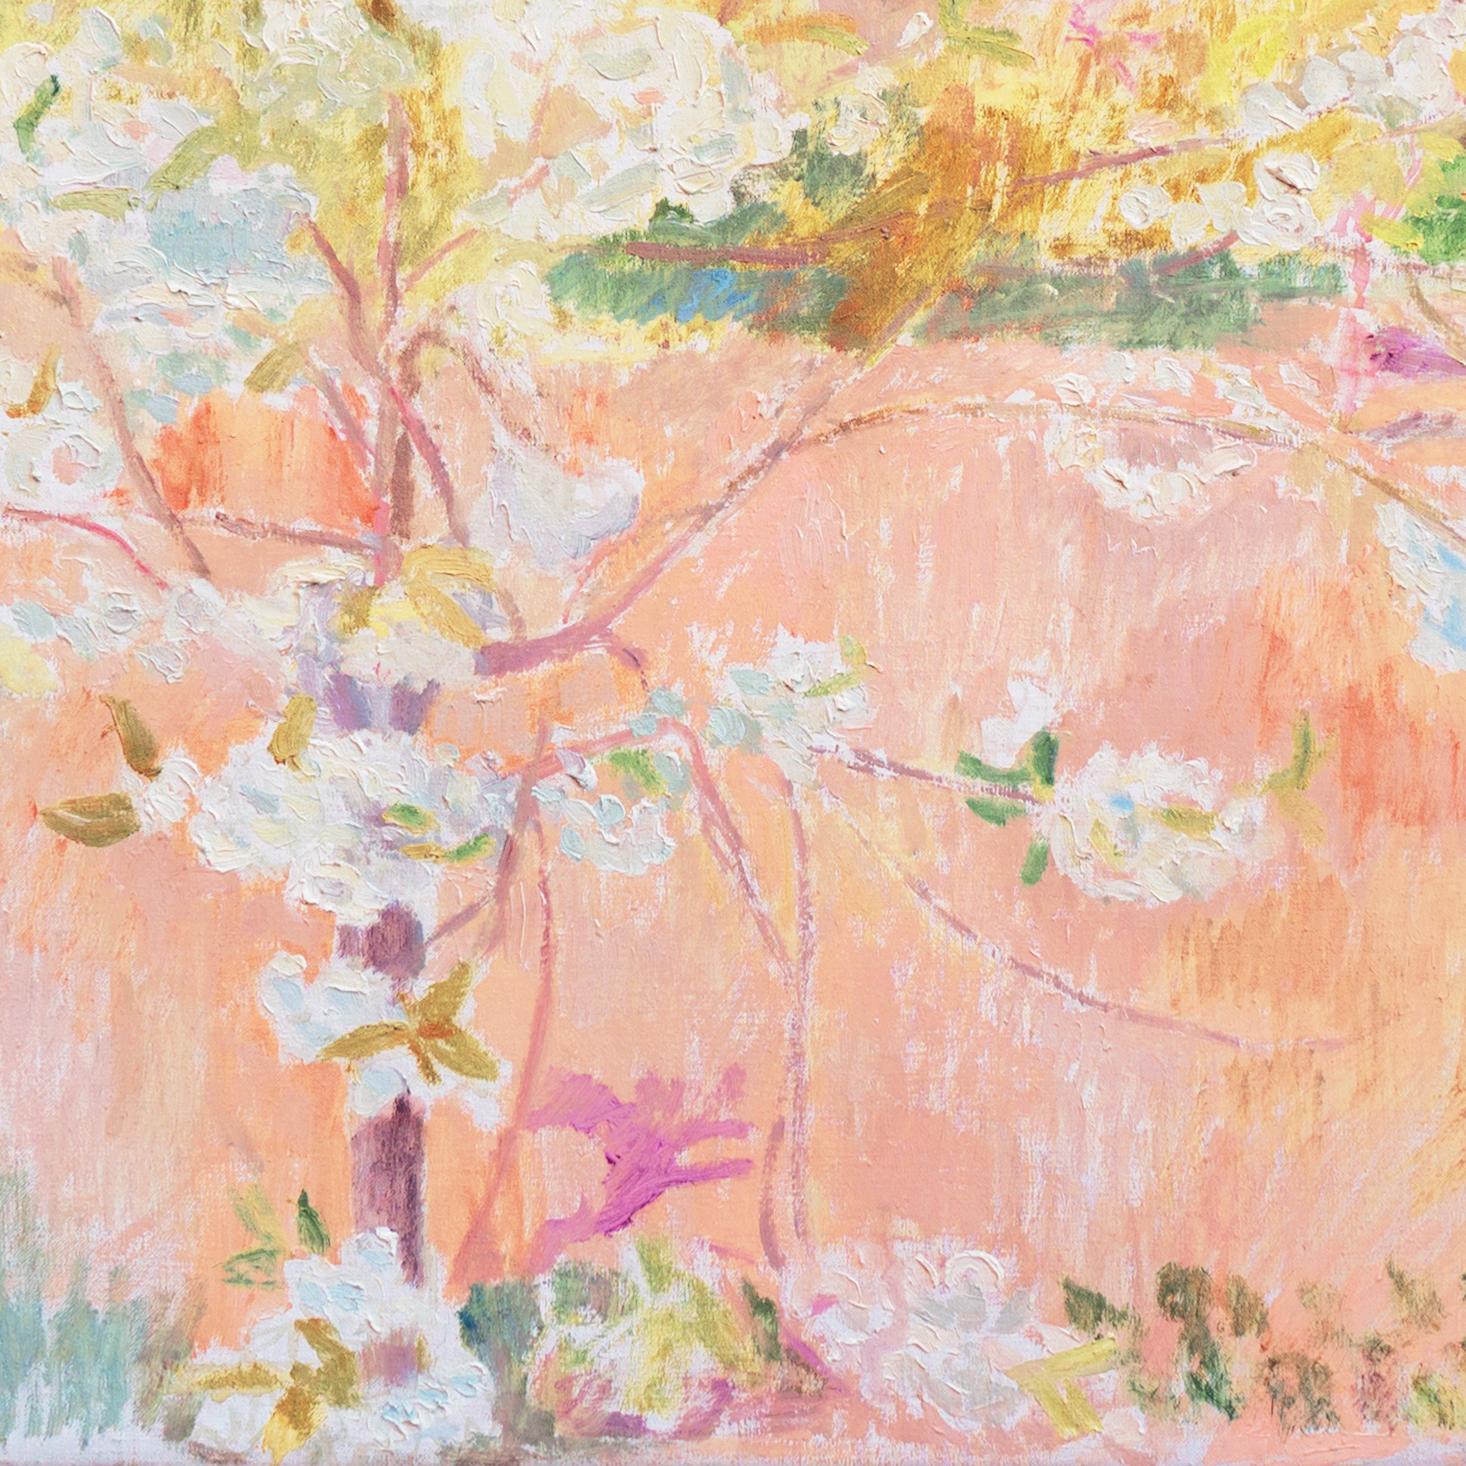 Signed lower right, 'V. Rorup' for Viggo Julius Rorup (Danish, 1903-1971) and dated 1966.

A large and lyrical spring landscape showing white apple-blossoms contrasted against a coral field with a view towards sunset clouds in the distance.

Viggo